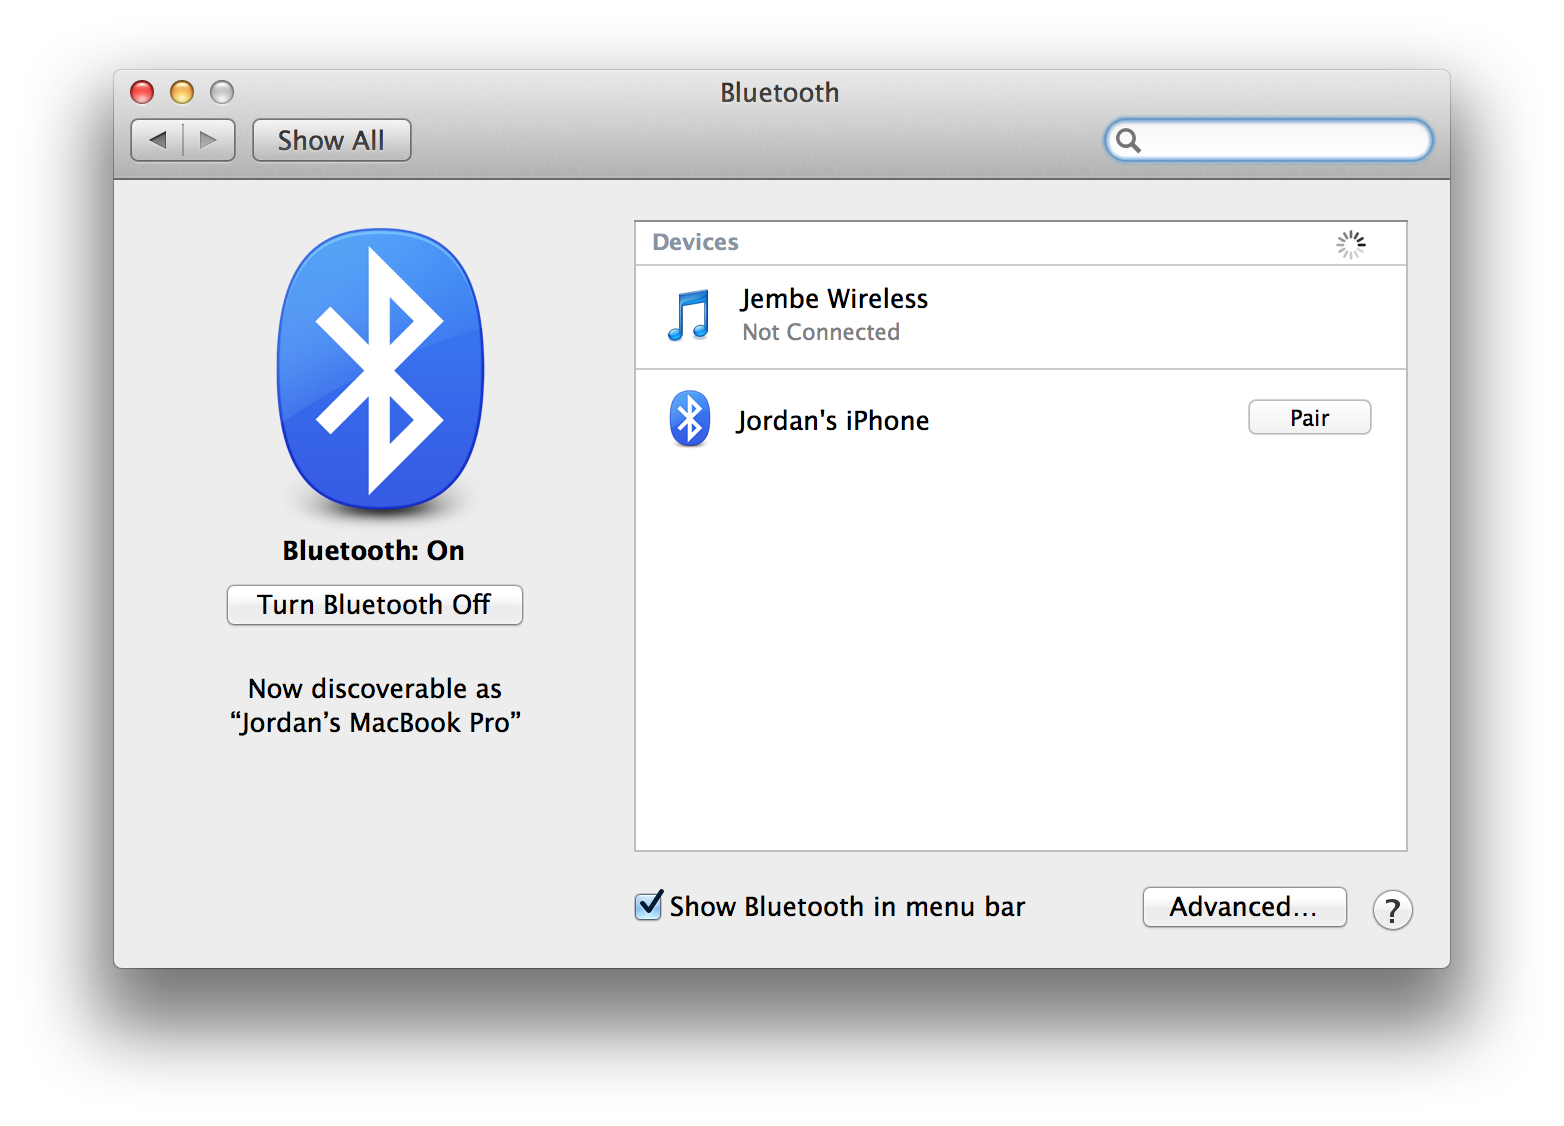 Bluetooth requires some additional configuration